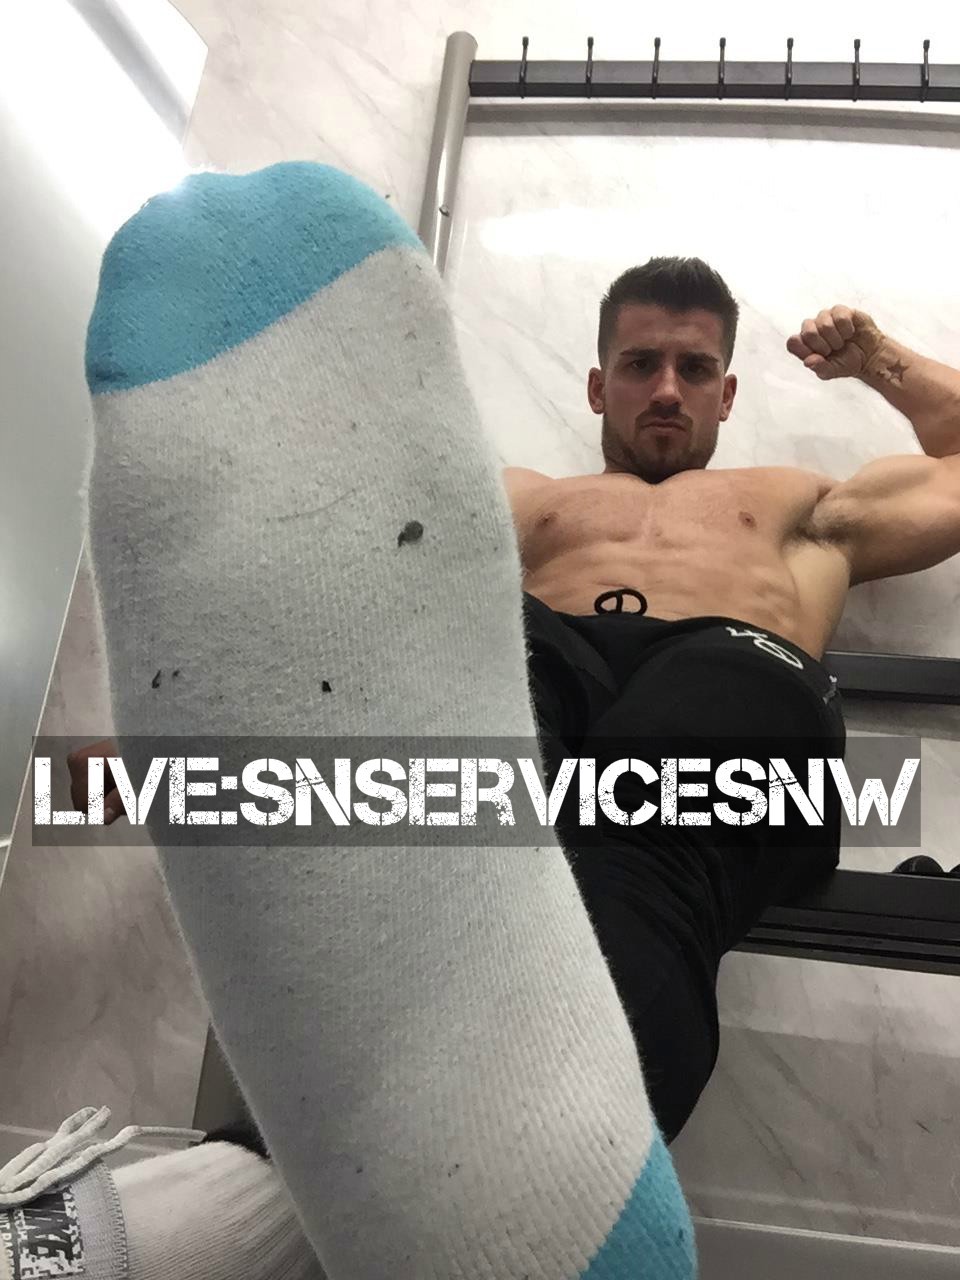 cashmastersam: Another day, another gym session. Paid for by you weak faggot fucks.